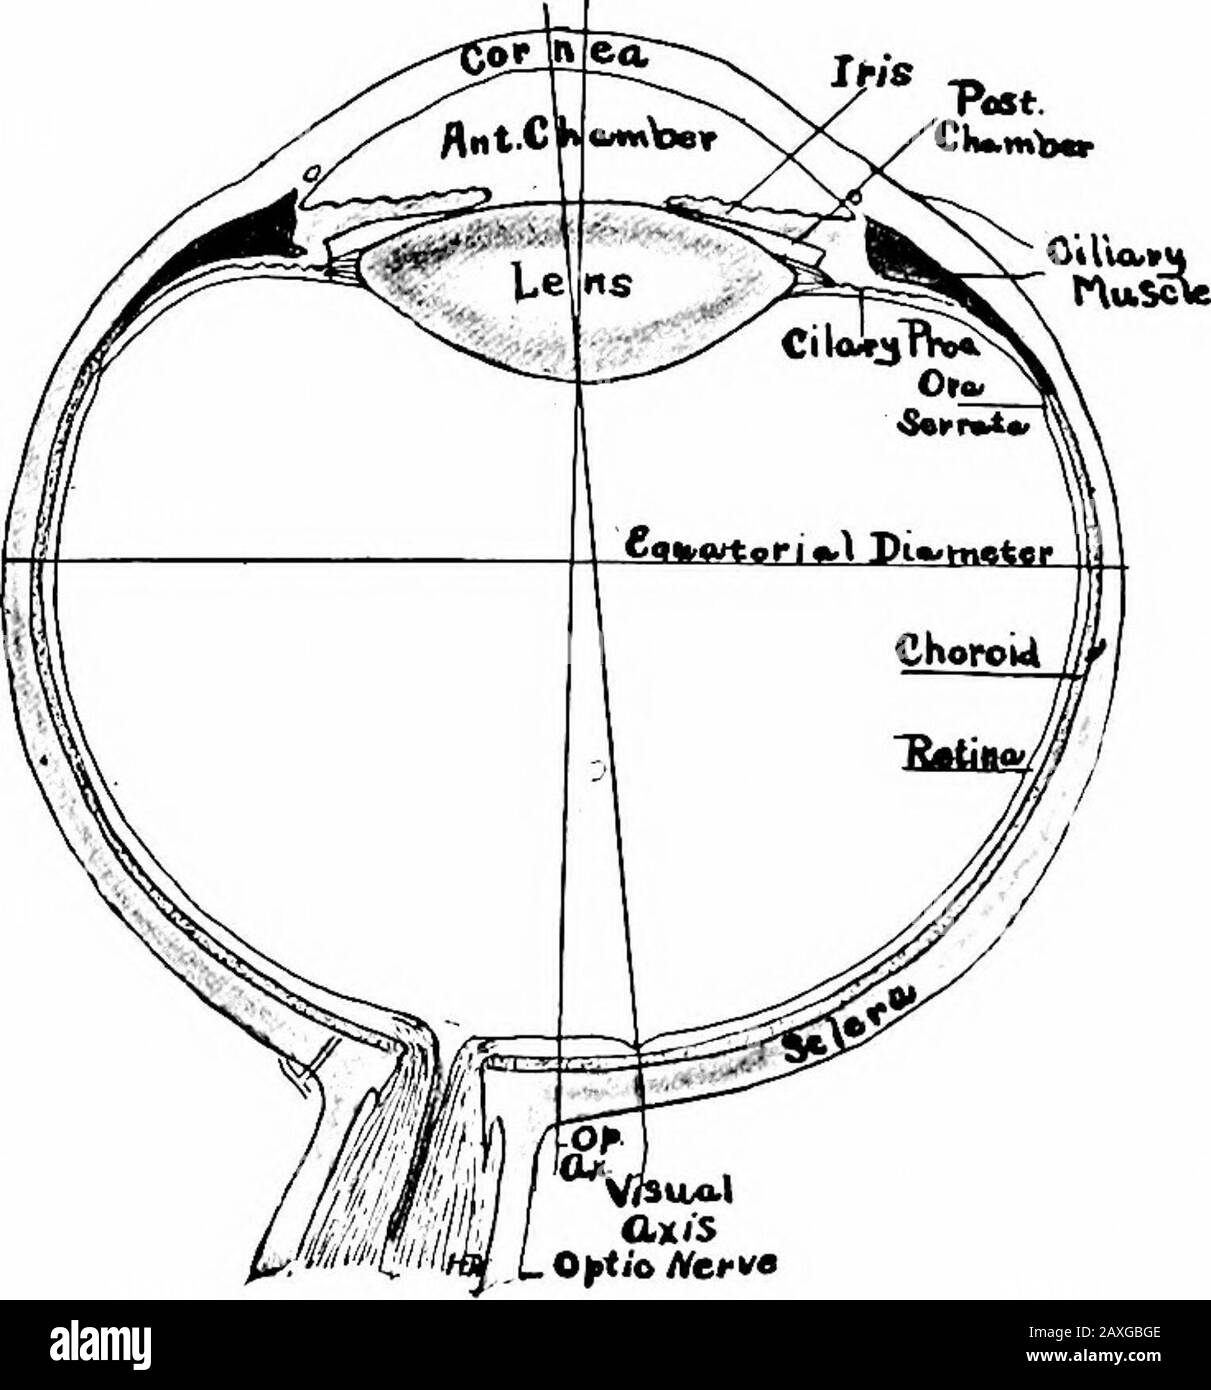 A manual of anatomy . ant behind that organ. THE EYEBALL The eyeball {bulbus oculi) occupies the anterior portion of the orbitbeing protected by the orbital margins and the eyelids. The antero-posterior and the transverse diameters are 24 mm. while the verticaldiameter is 23.5 mm. so that the eyeball is not quite a sphere at theequator. At birth the eyeball is about 17.5 mm. in diameter and is THE CORNEA 343 nearly spherical in shape. It increases about 3 mm. between birthand puberty and soon thereafter attains its adult size and shape. The apparent difference in the size of the eyeballs of di Stock Photo